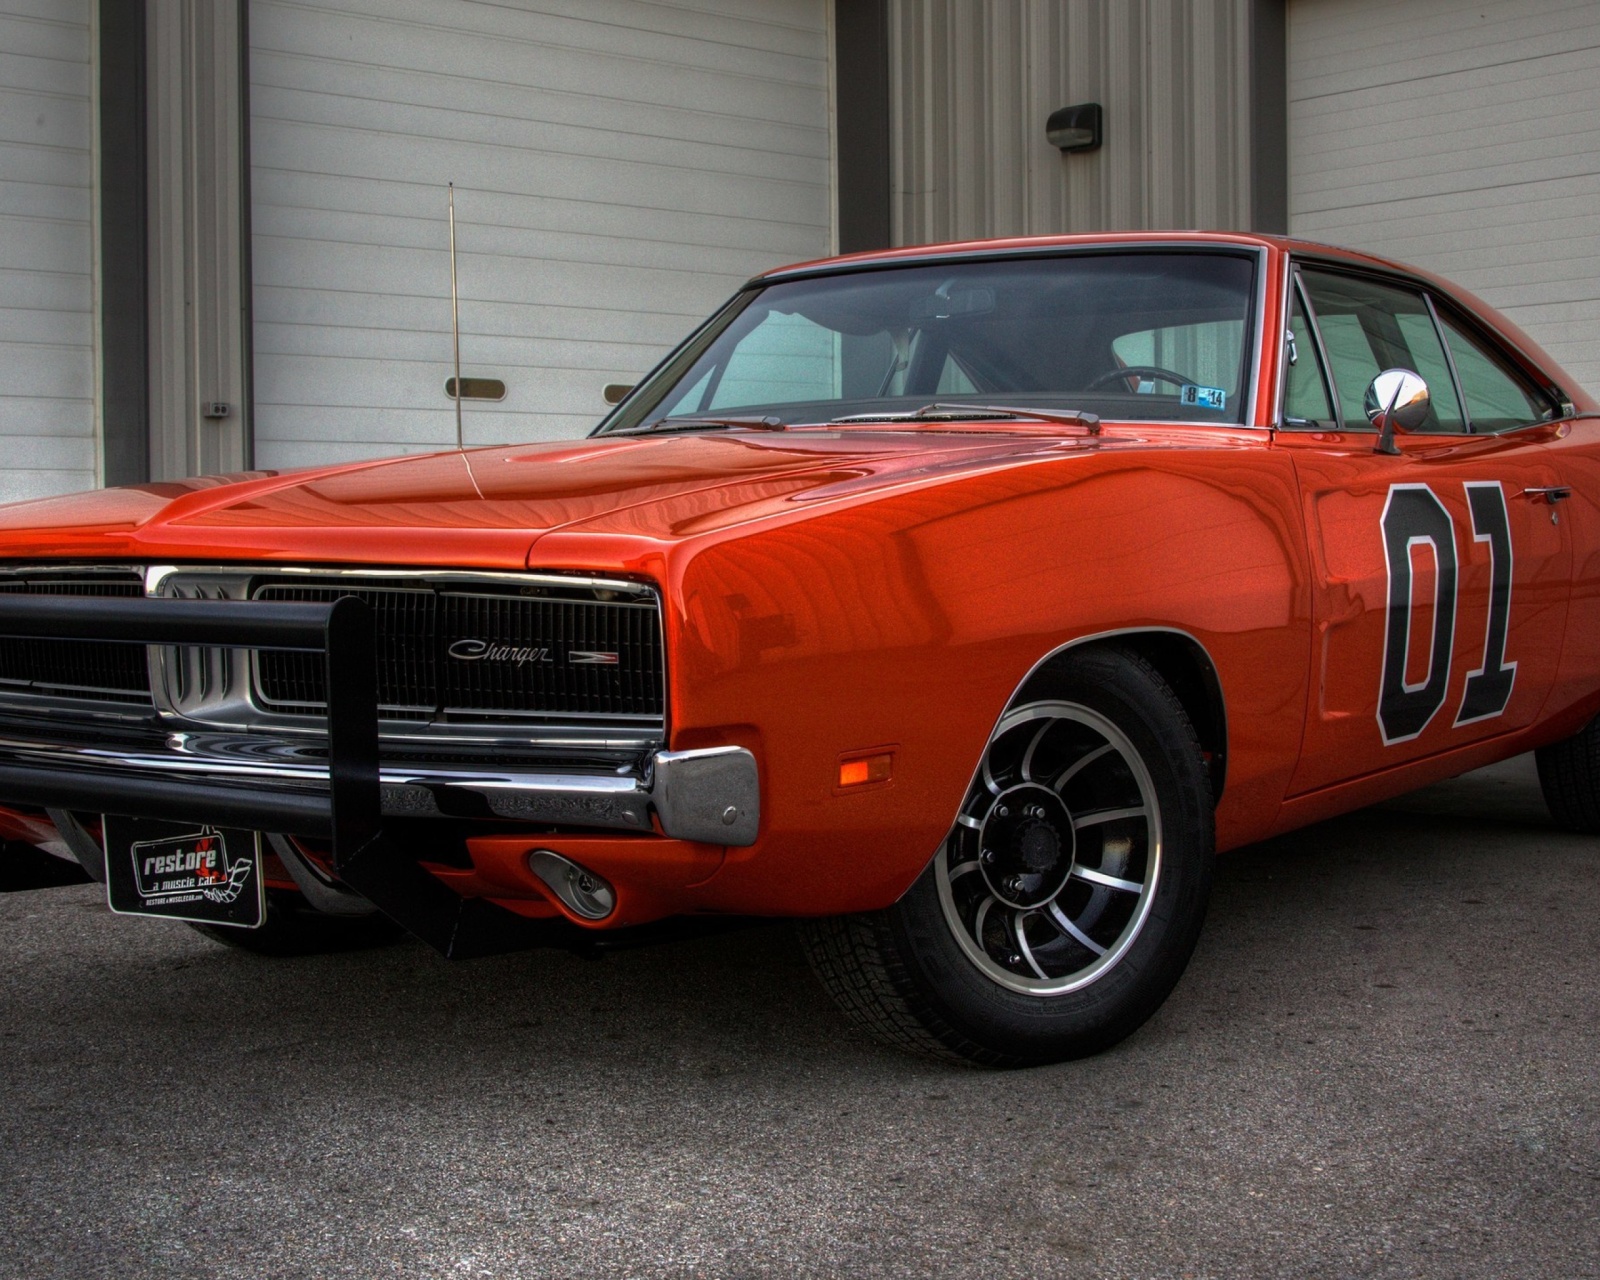 1969 Dodge Charger wallpaper 1600x1280